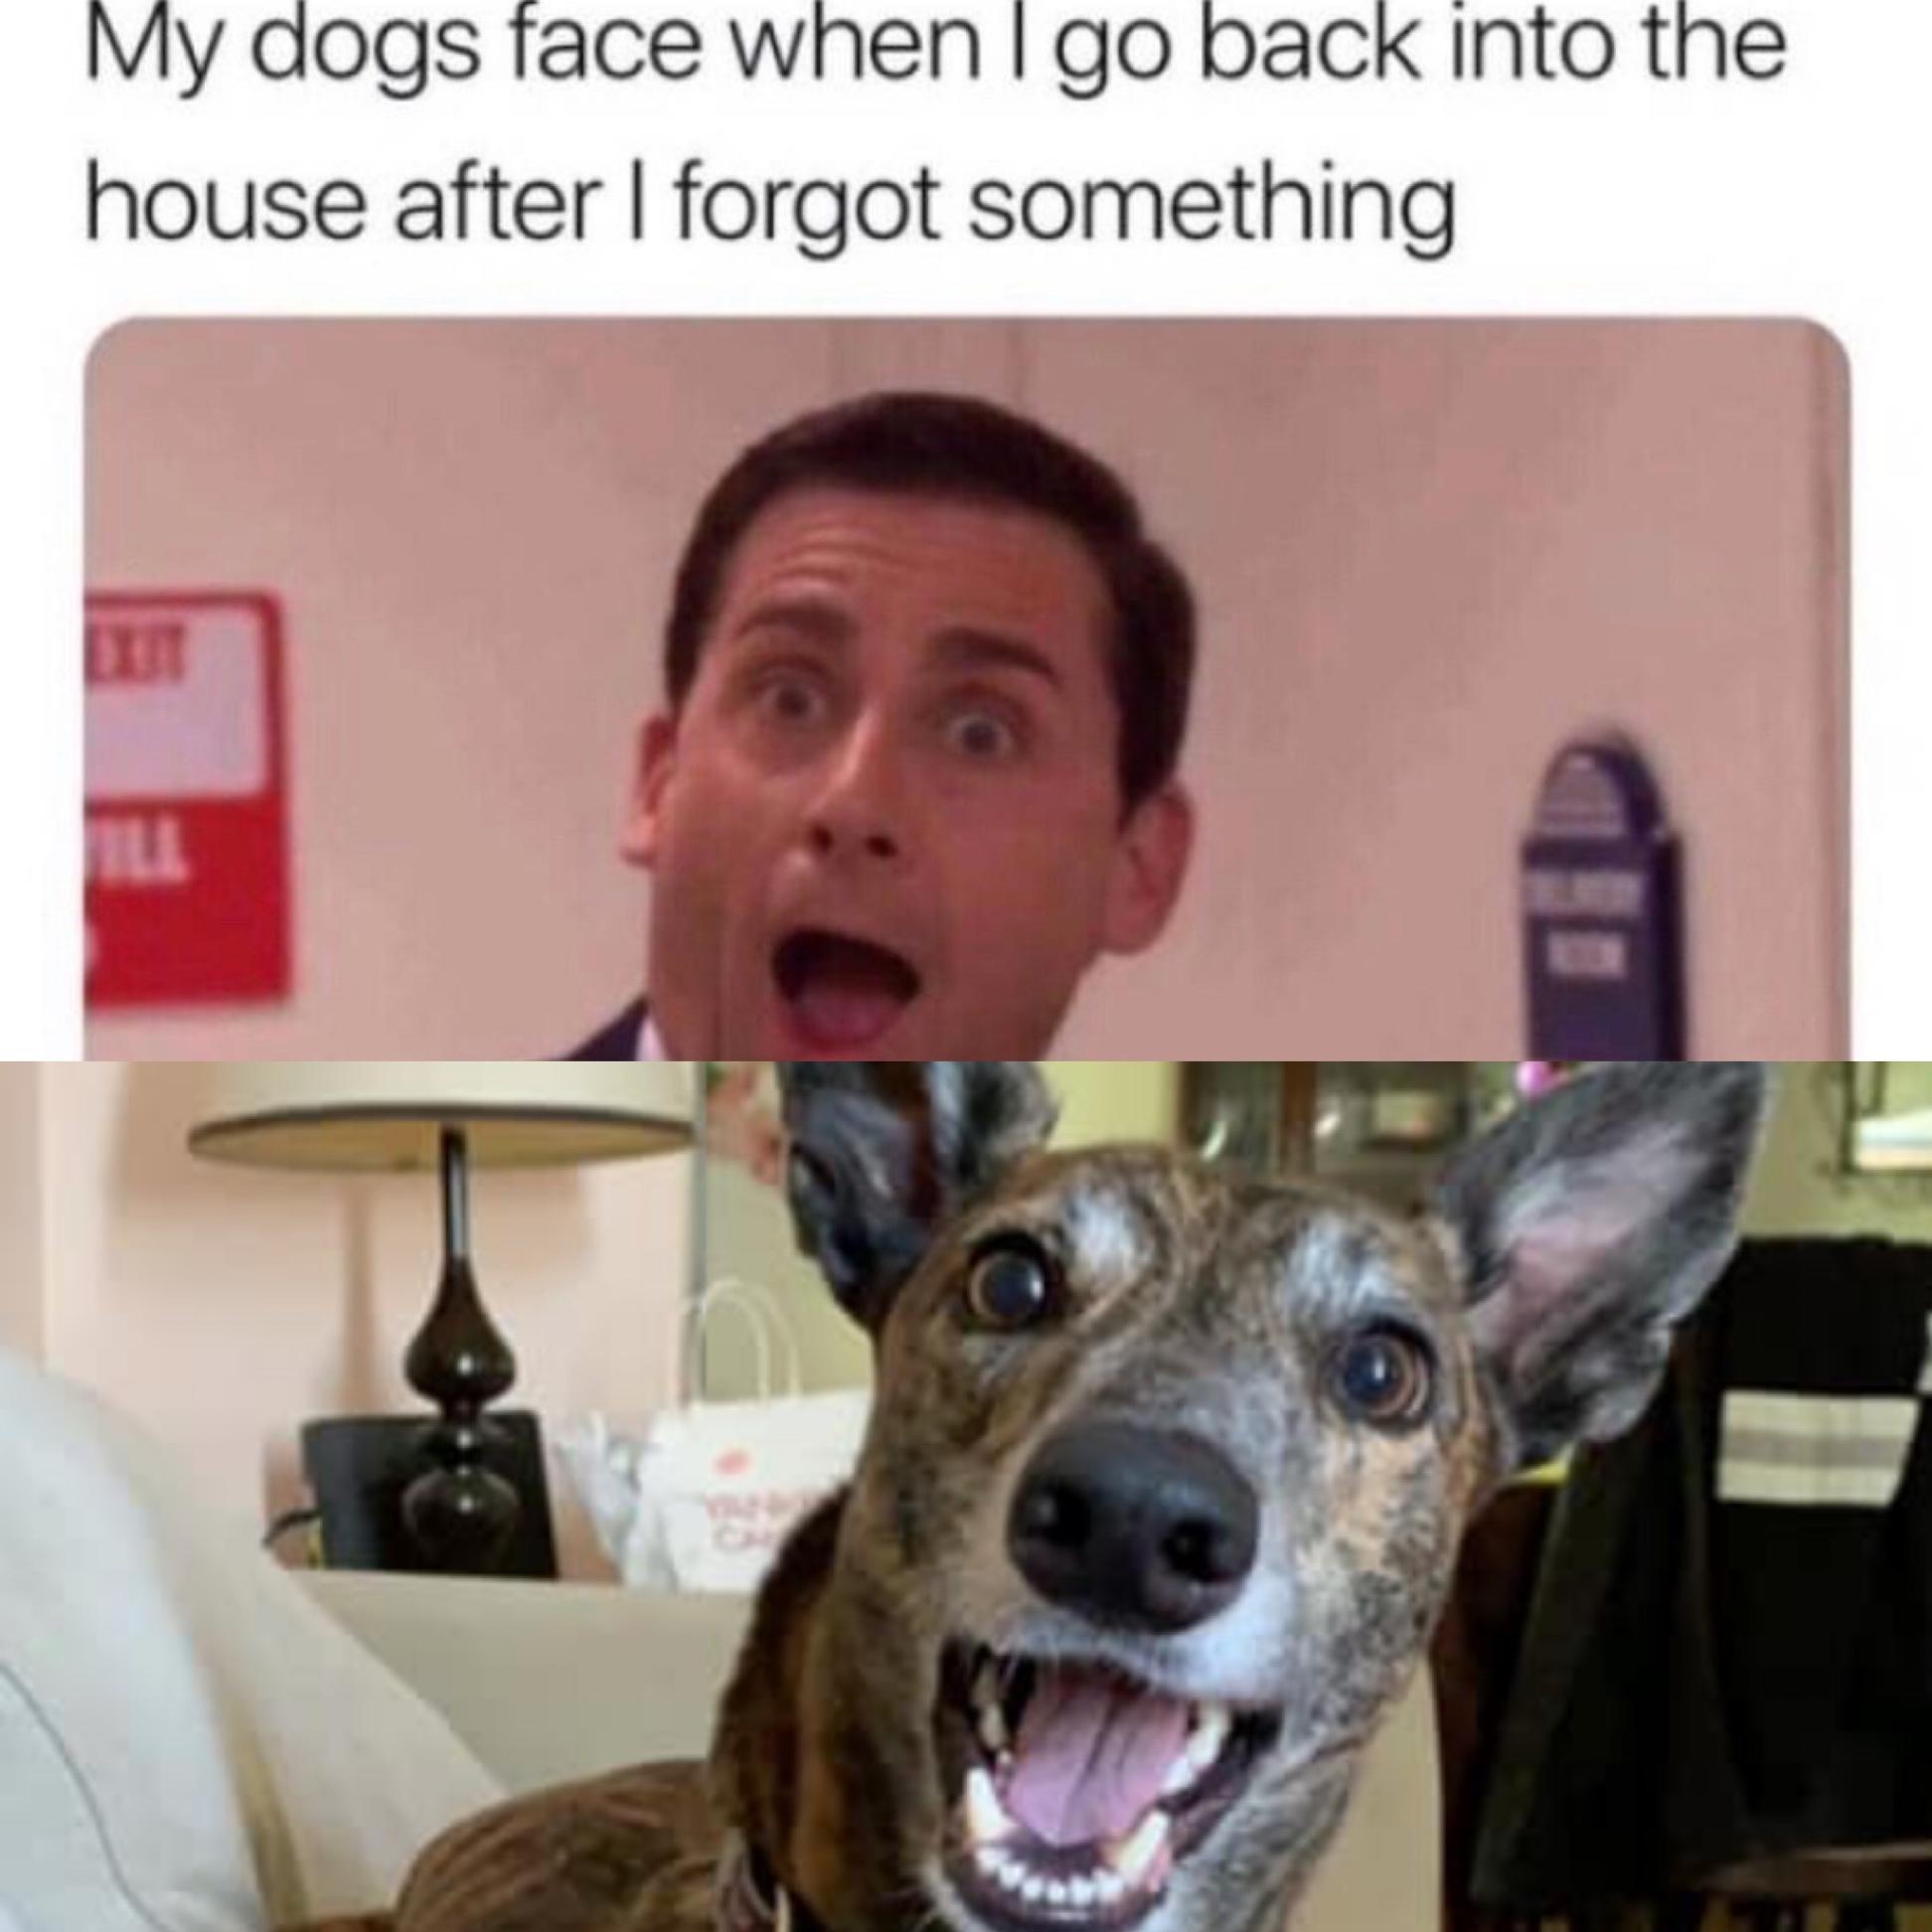 photo caption - My dogs face when I go back into the house after I forgot something